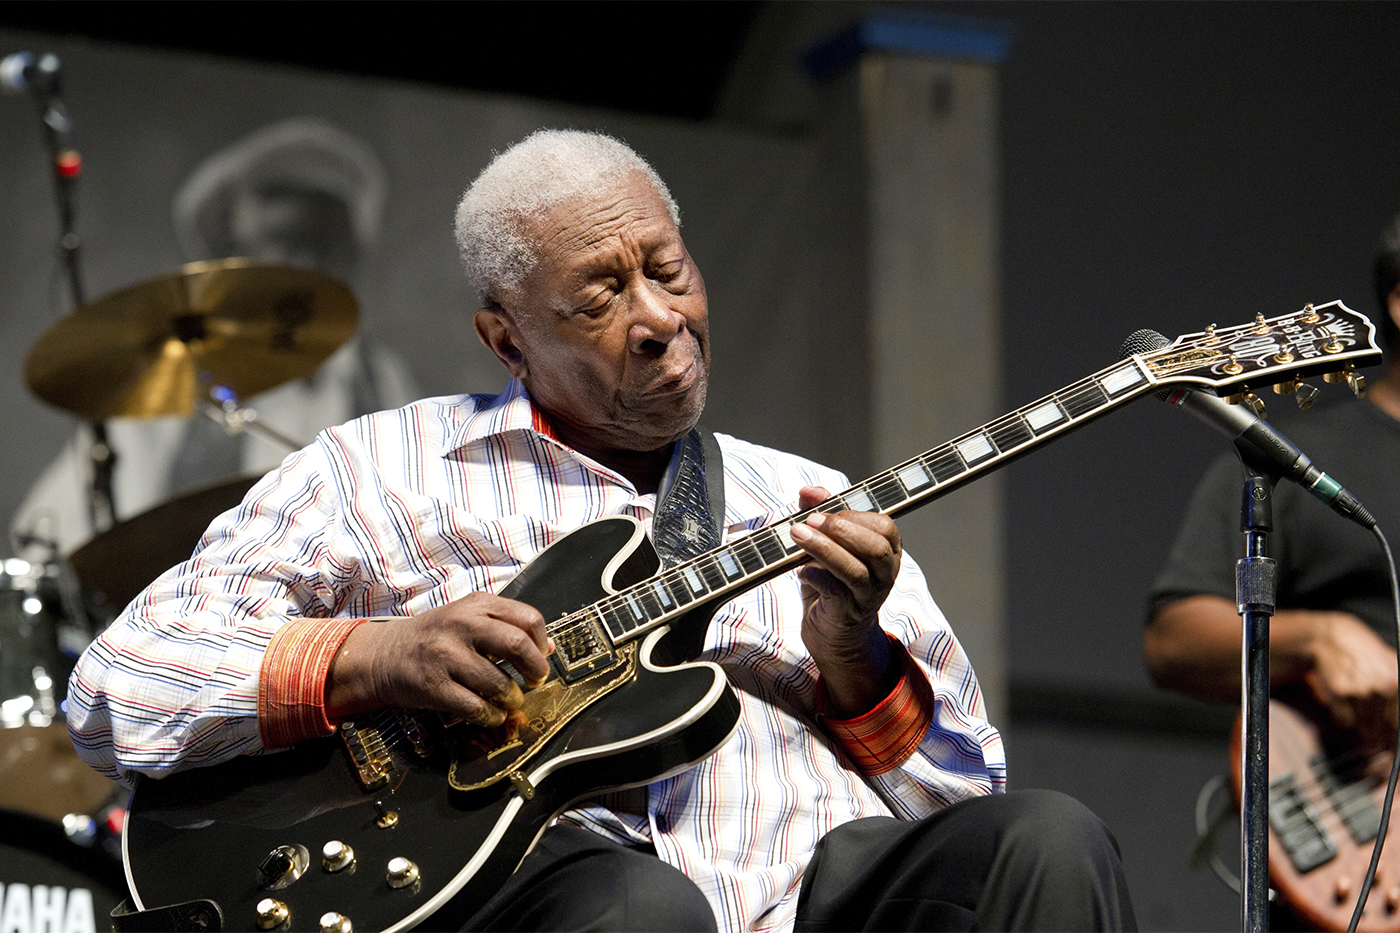 B.B. King performing at the New Orleans Jazz & Heritage Festival.